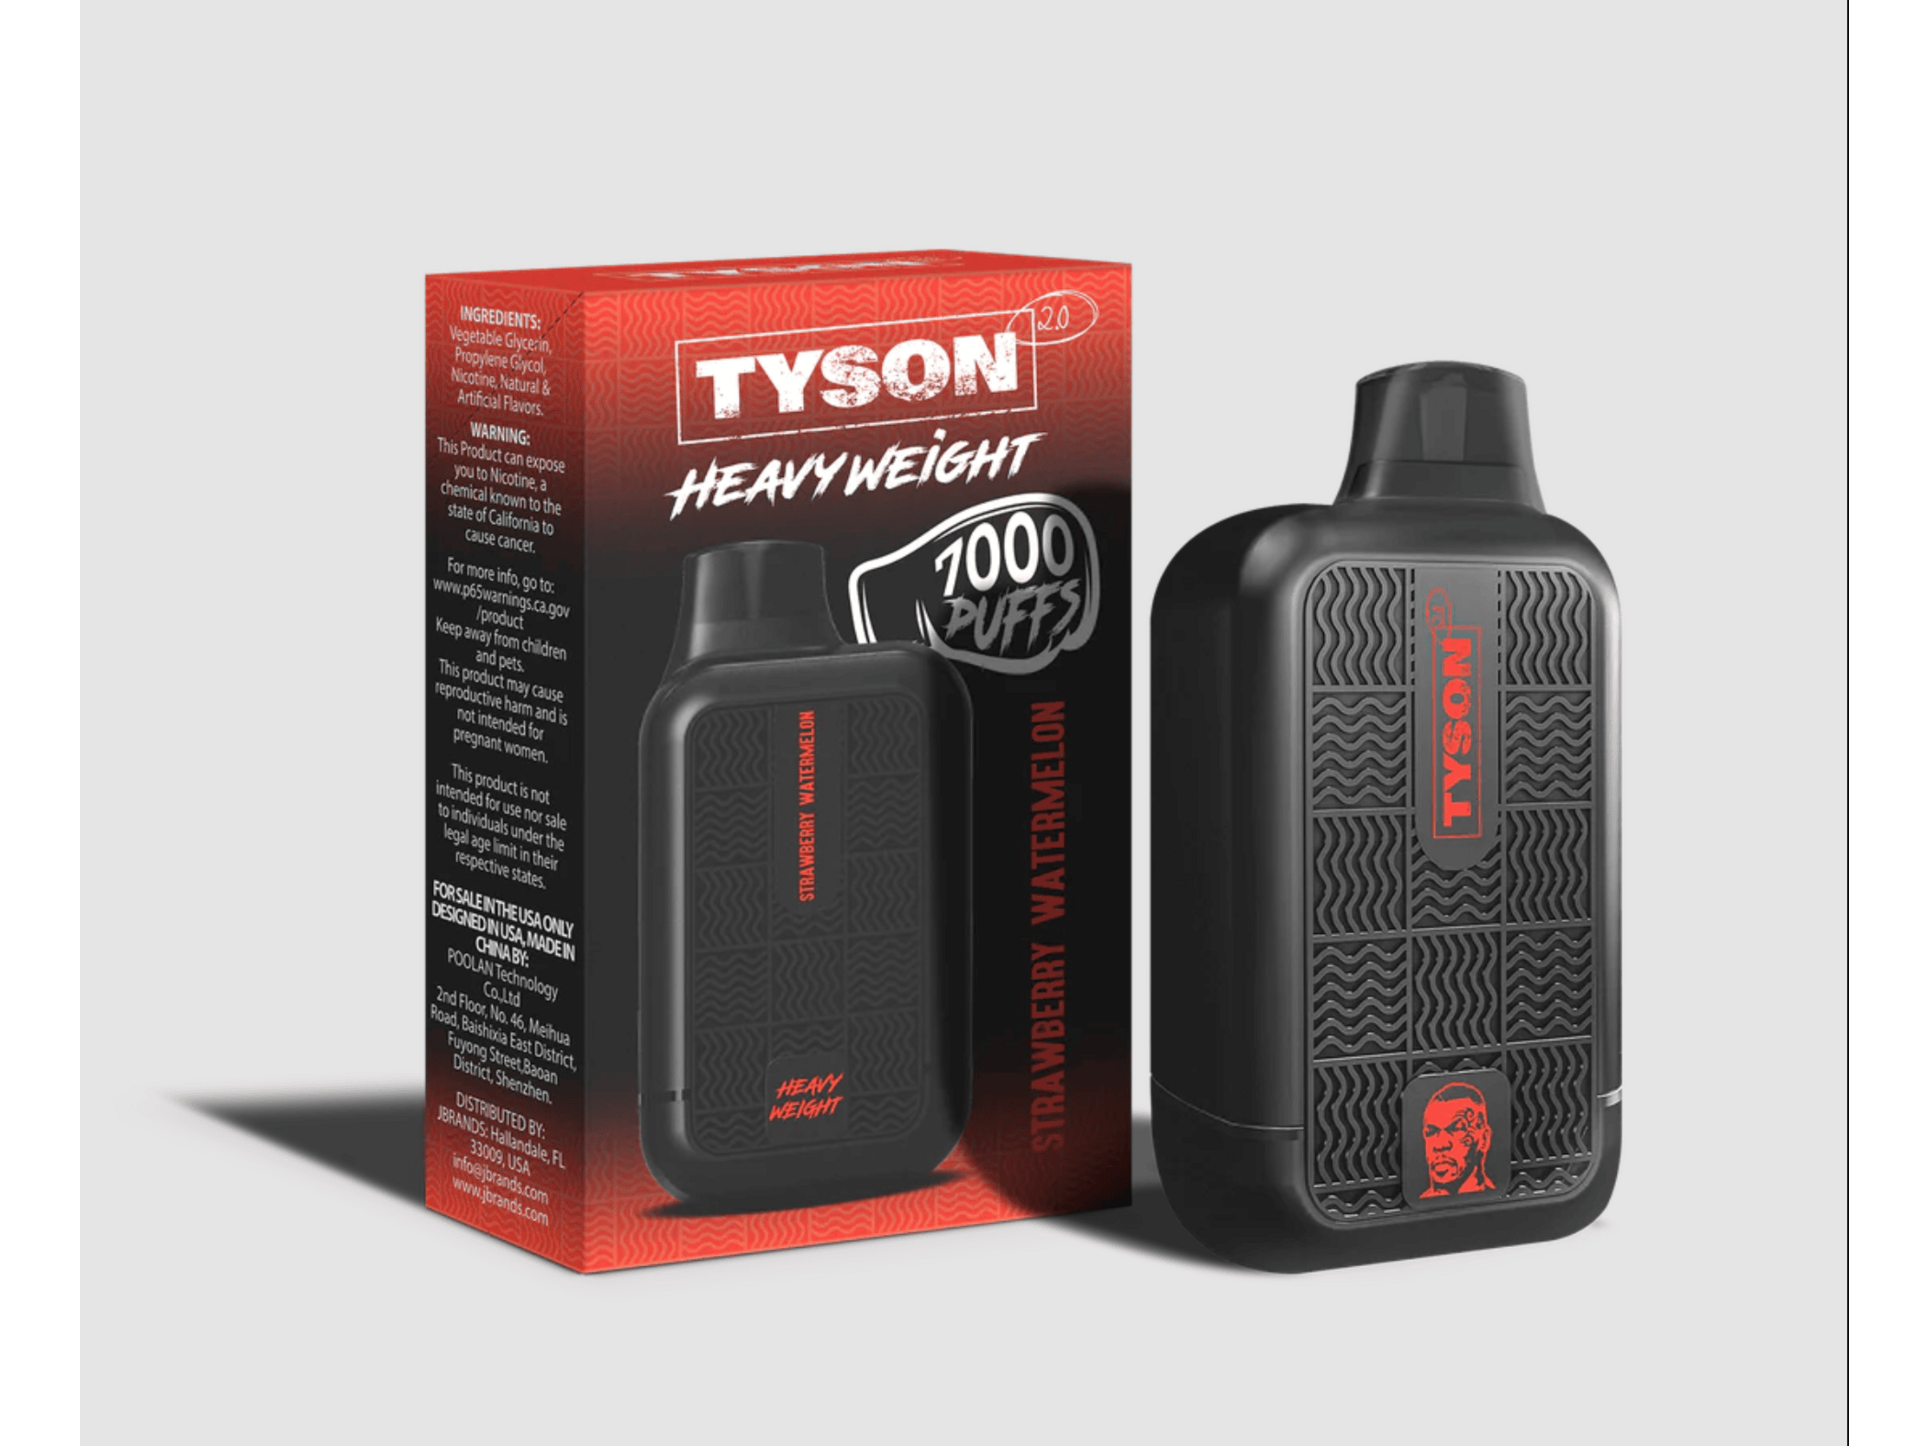 Tyson Heavyweight Strawberry Watermelon flavored disposable vape device and box.